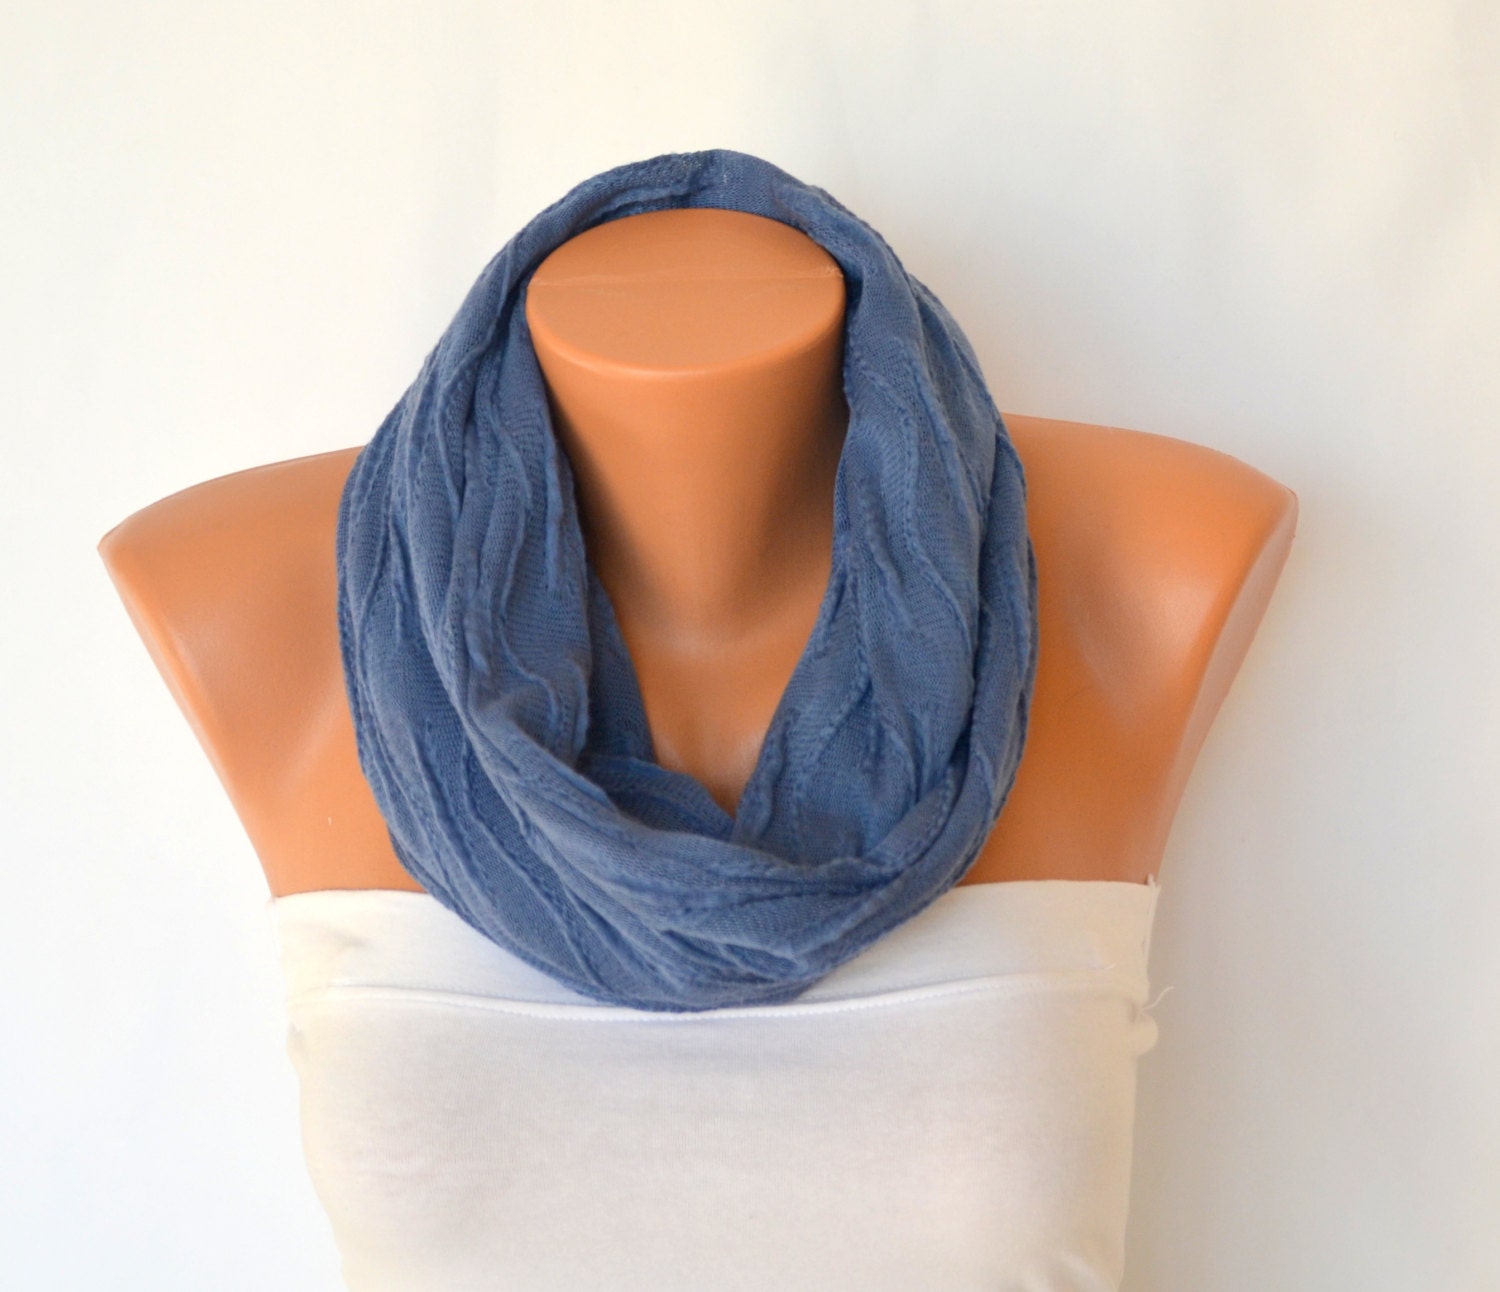 Denim blue machine knit infinity scarf circle scarf winter scarves neck warmers cowl birthday gifts fashion accessories - bstyle